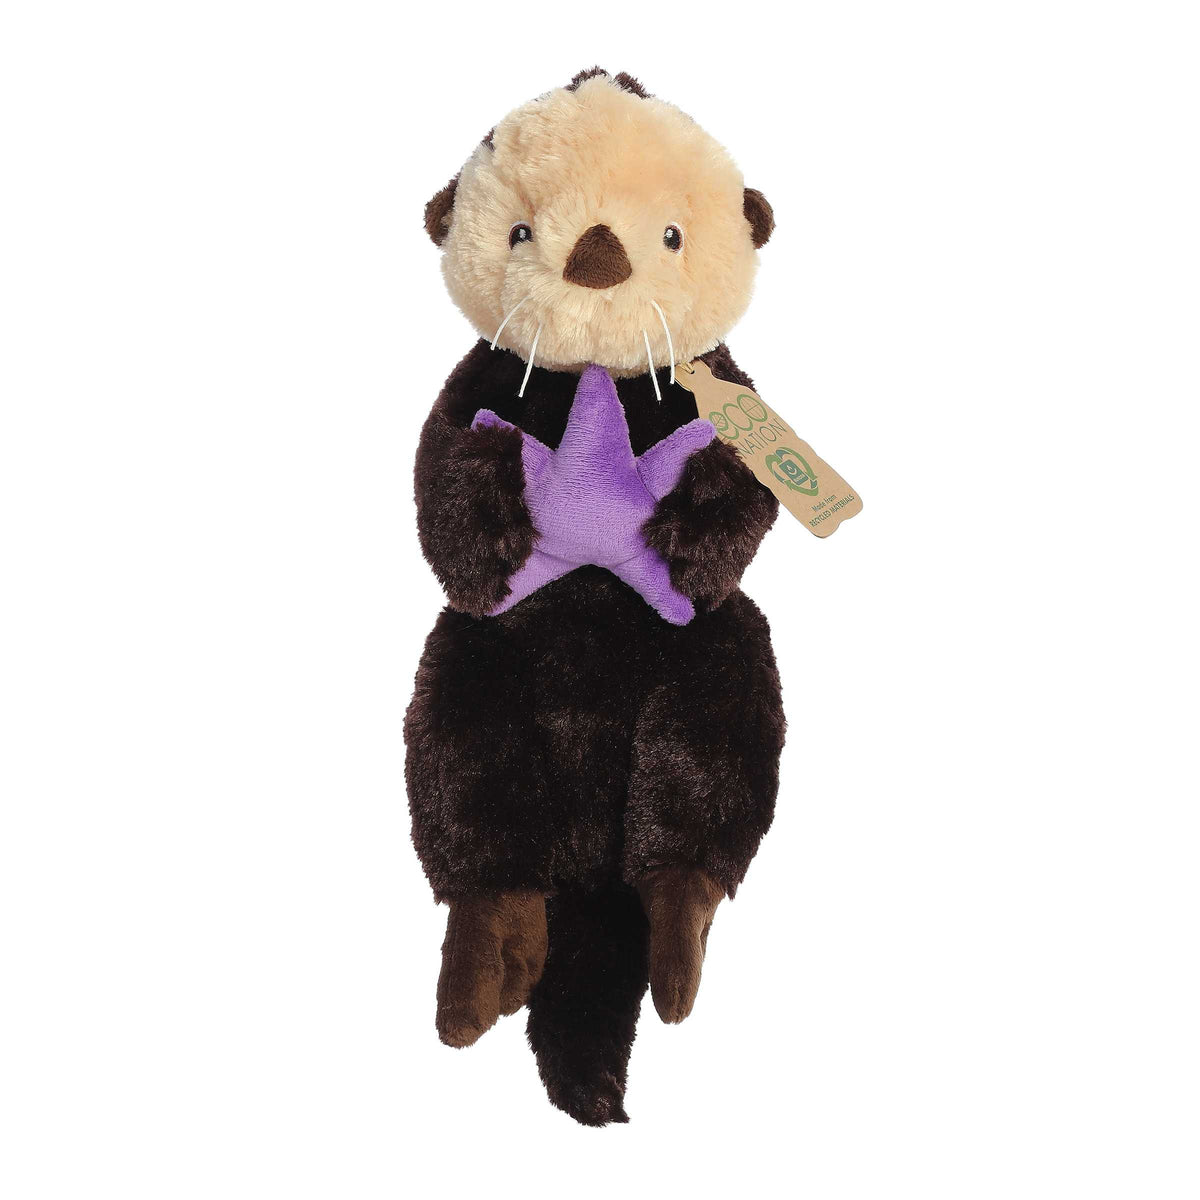 Eco Hugs Sea Otter by Aurora, dark brown with a purple starfish, made from recycled materials, with an eco-friendly hang tag.